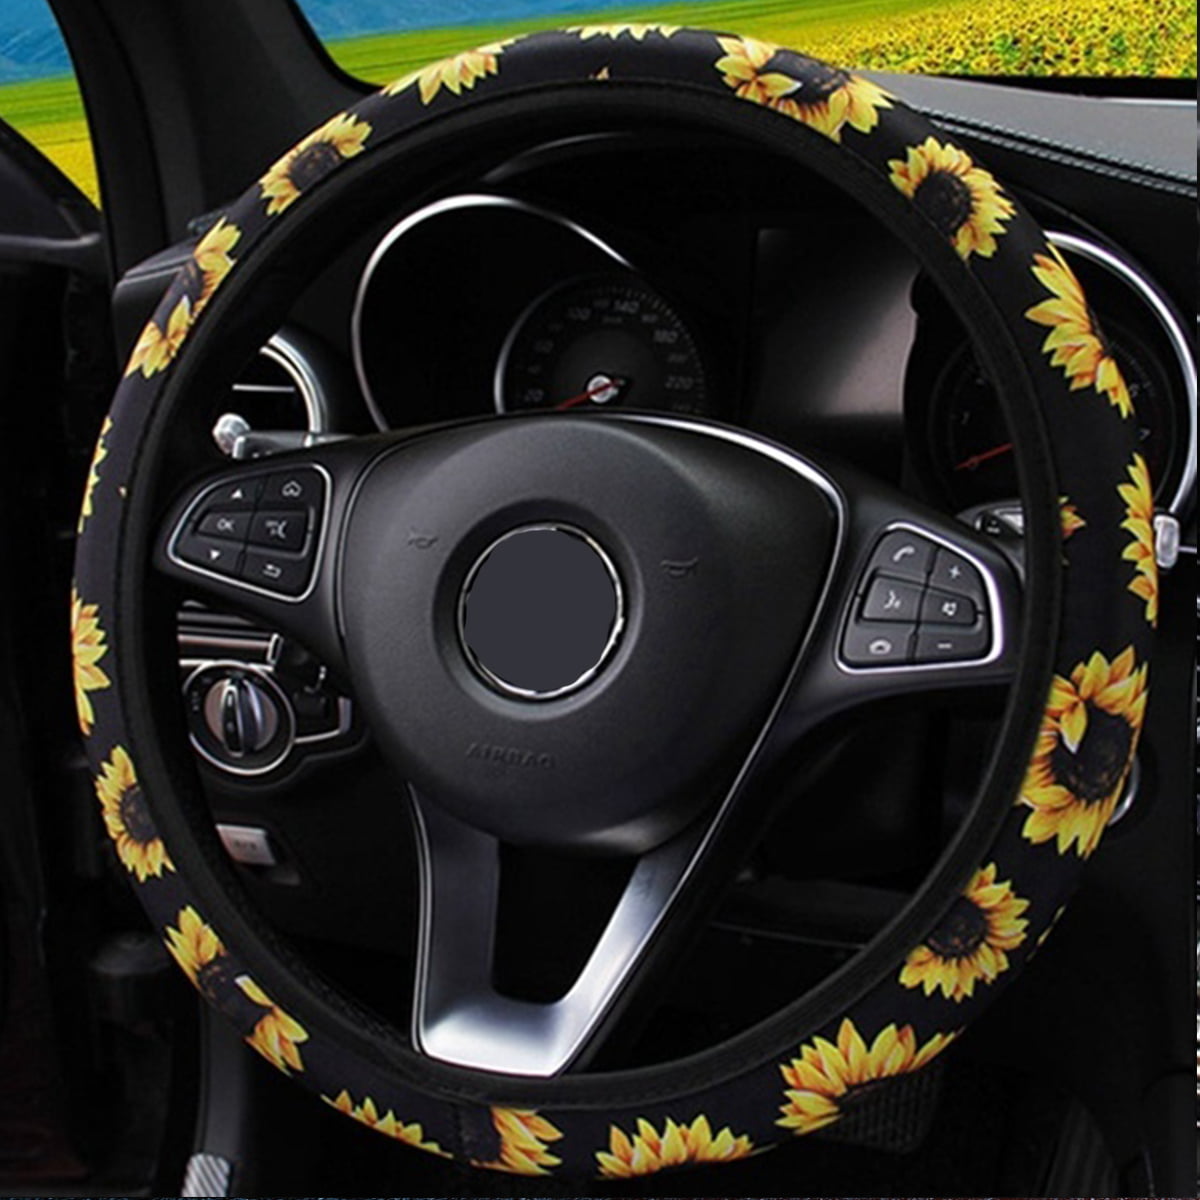 Sunflower Steering Wheel Cover Universal Fit 15 inch Car Wheel Protector with Elastic Stretch for Women Girls 